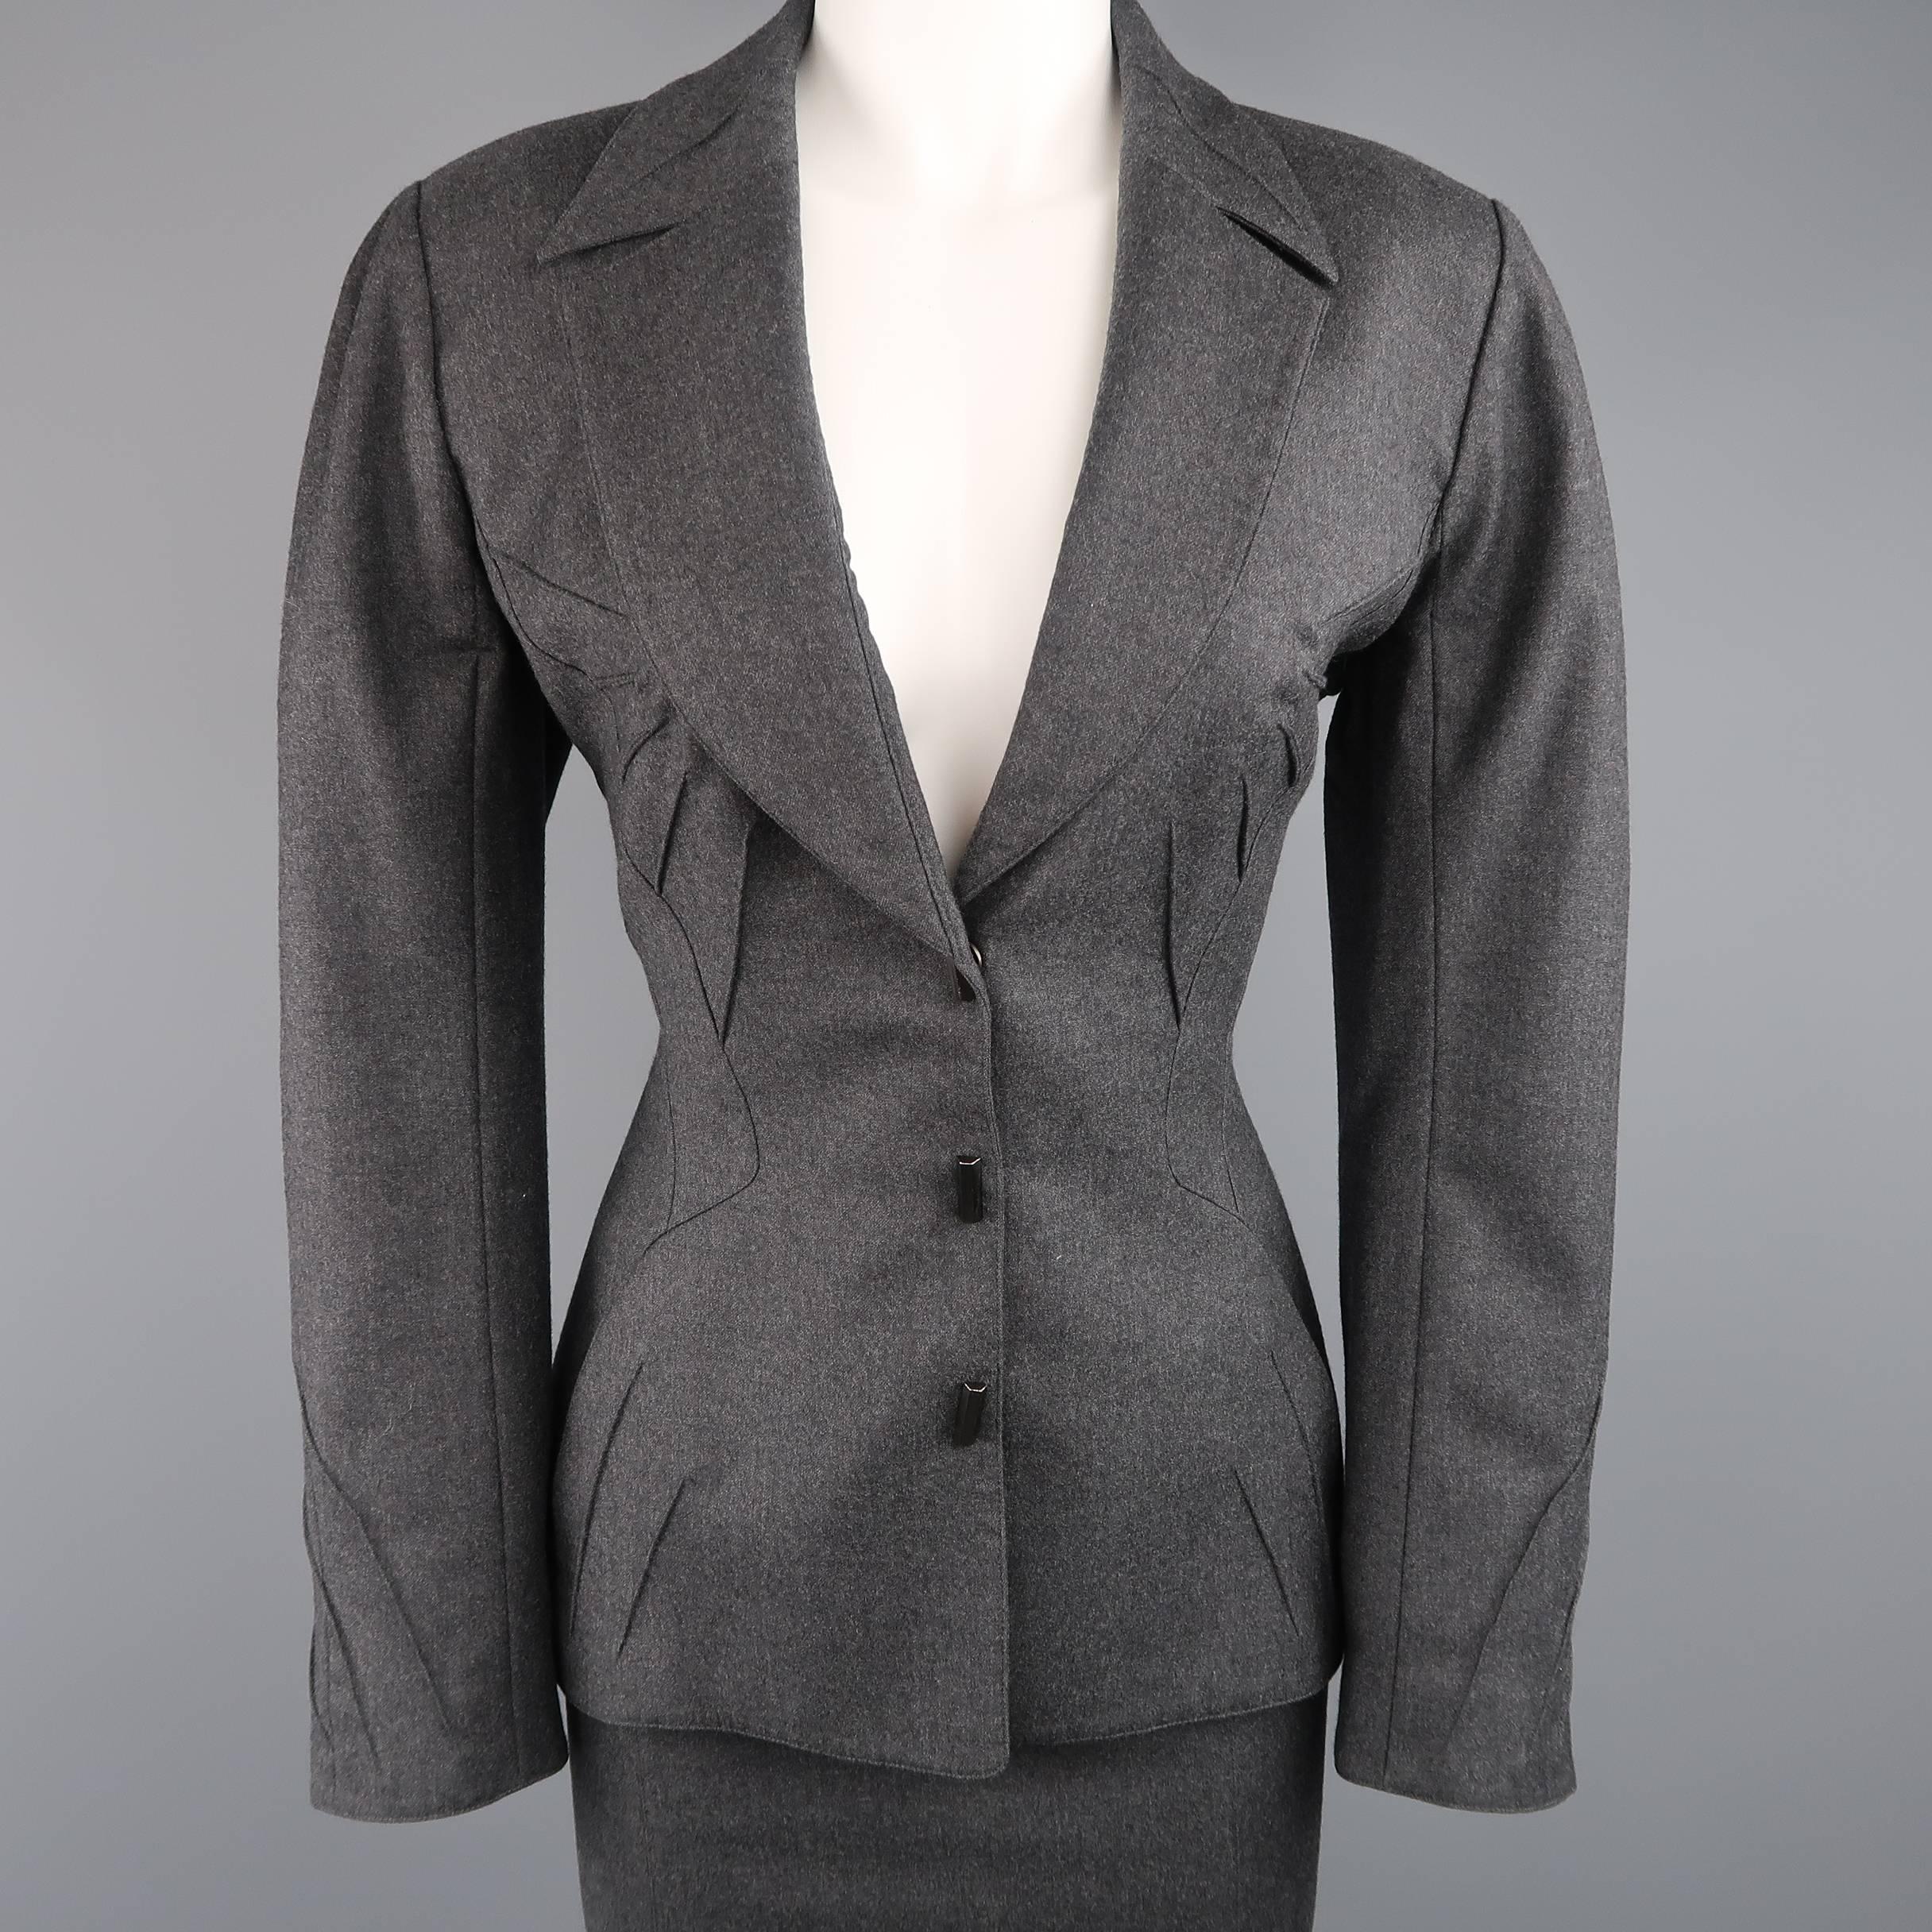 This gorgeous early 1990's THIERRY MUGLER suit comes in a soft dark heather gray wool and includes a cinched waist, cropped jacket with unique piping details throughout, signature downward point lapel, and triple snap studded closure with matching